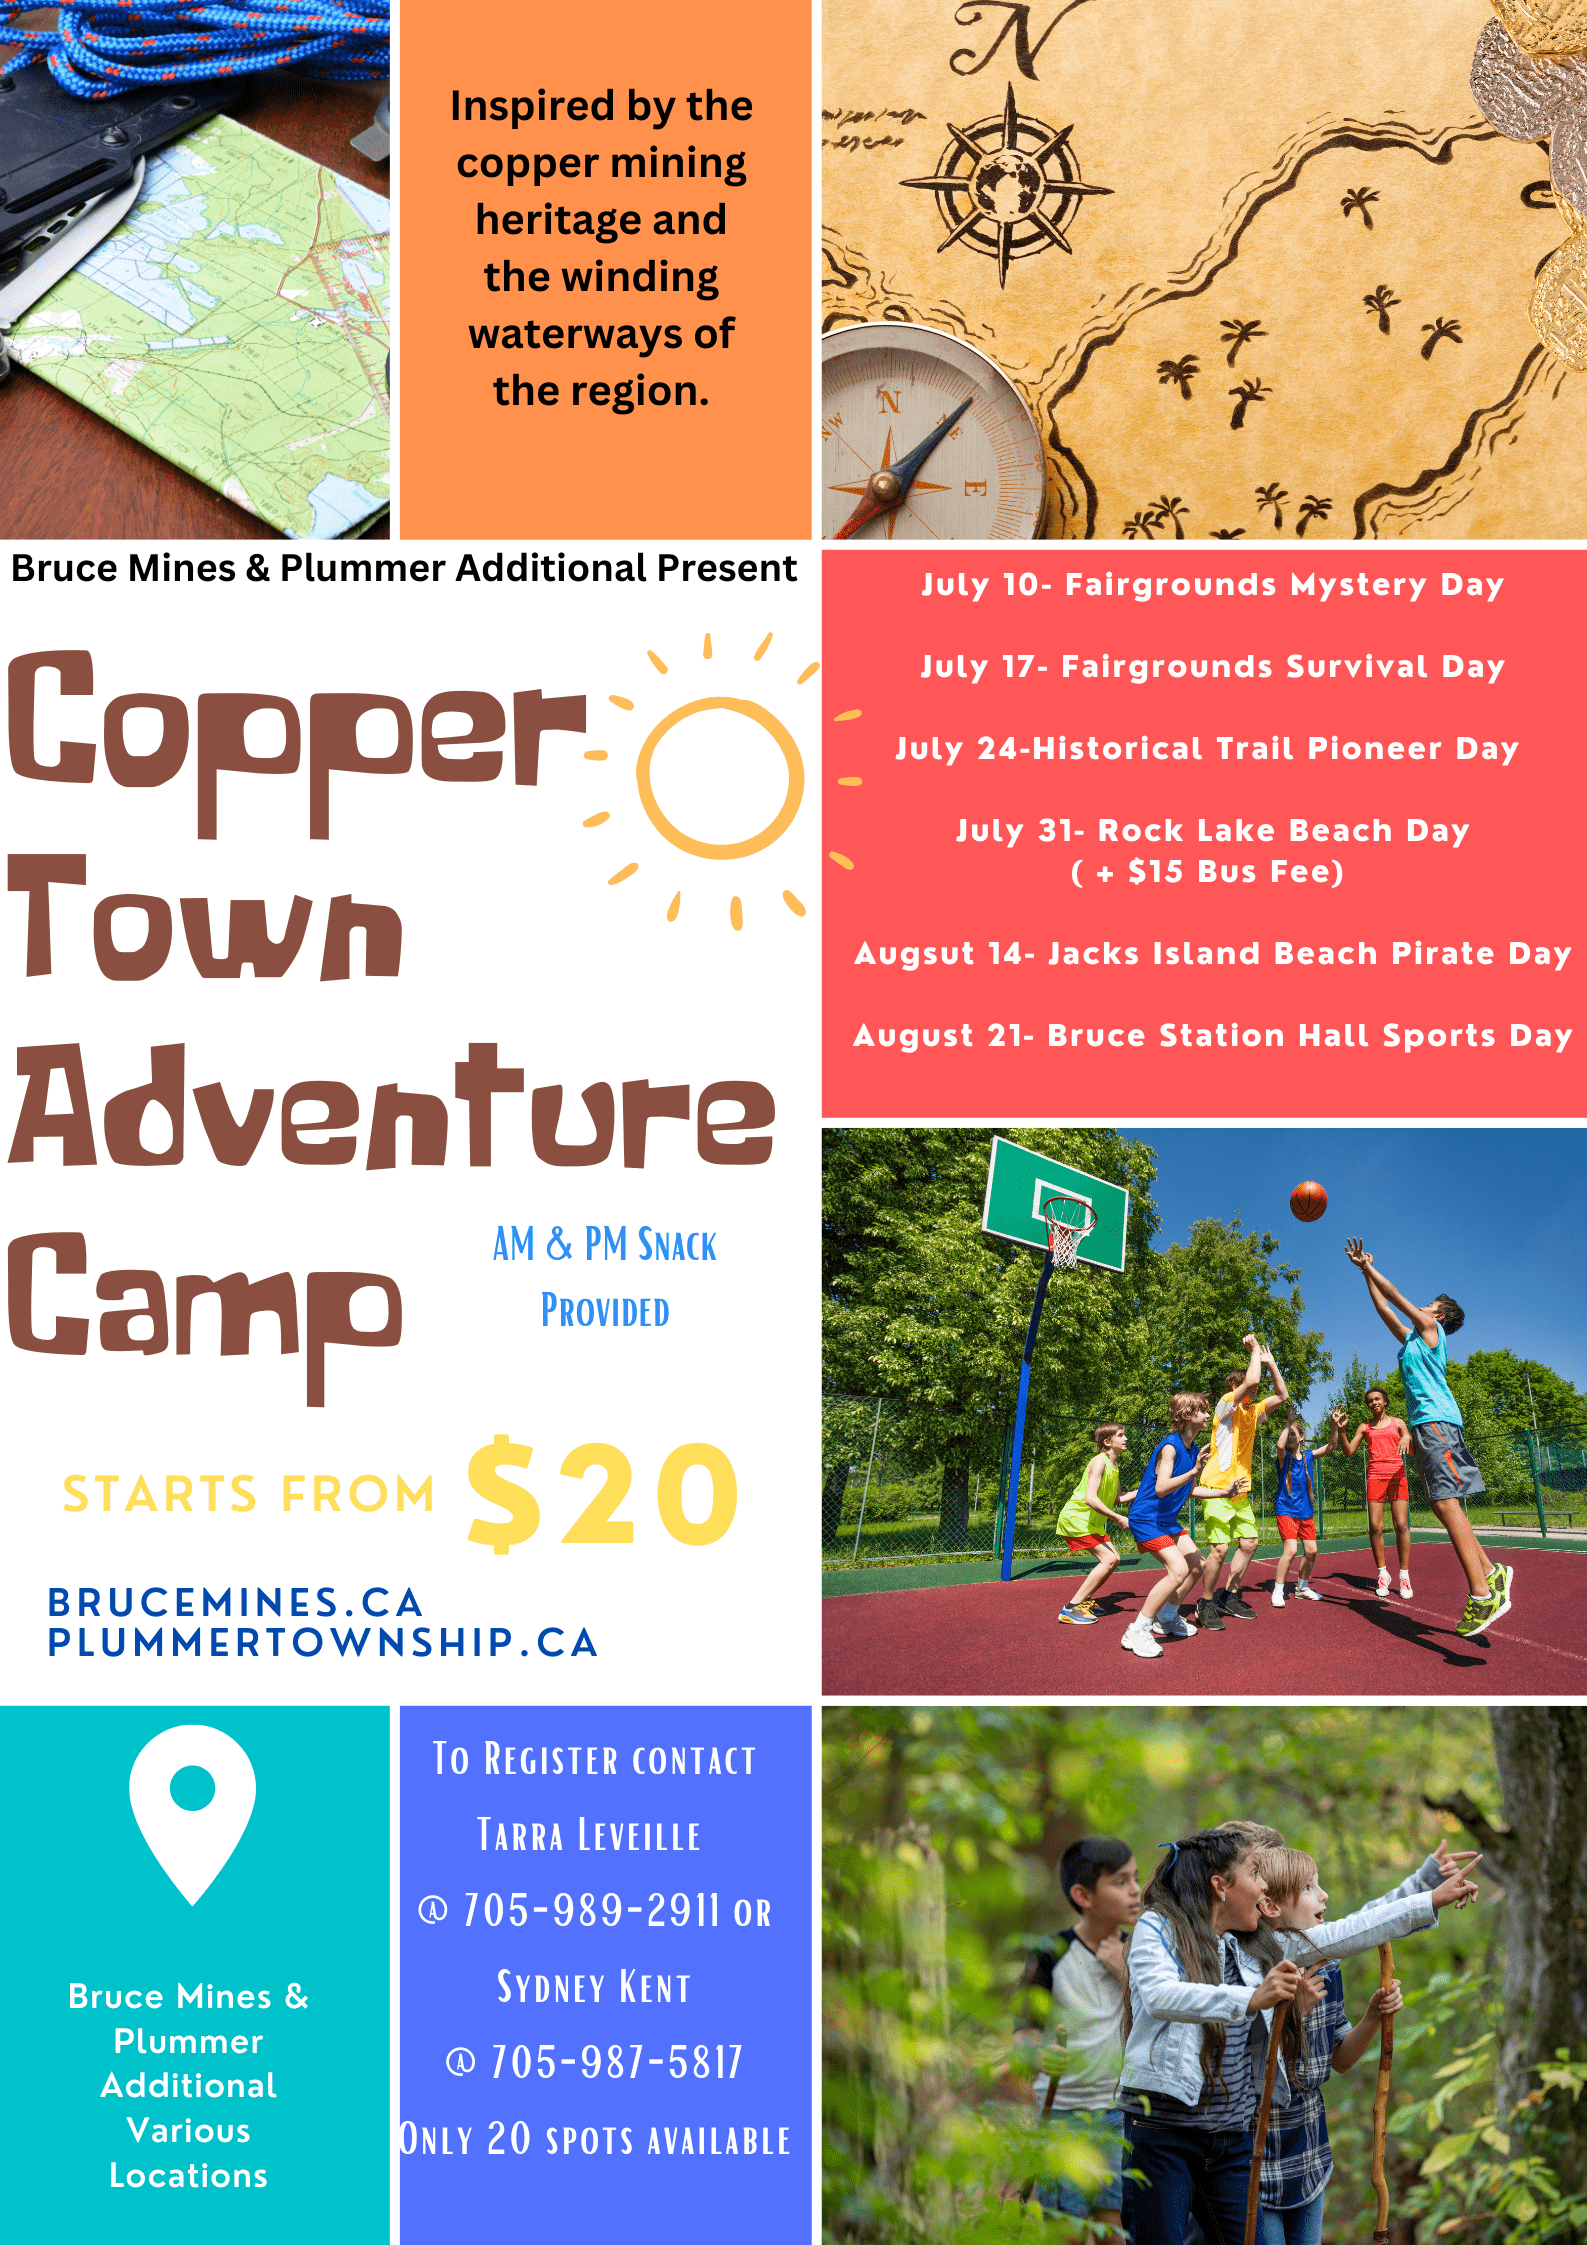 Copper Town Adventure Camp - July 24